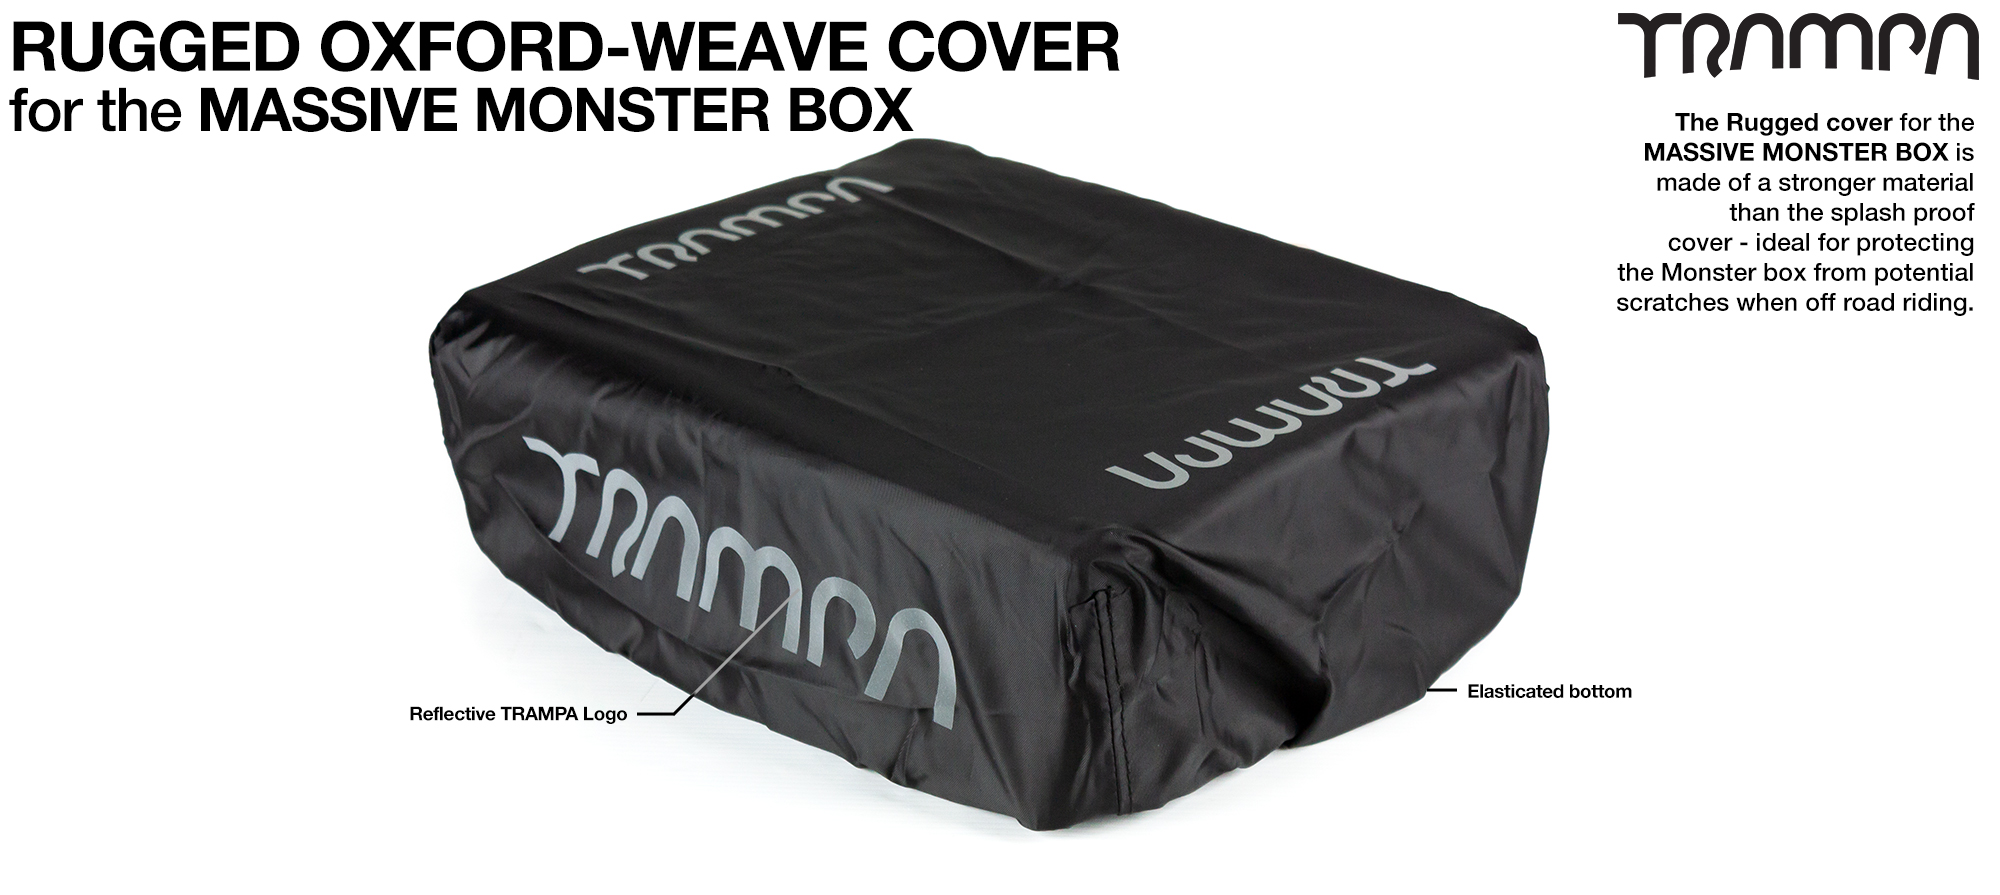 MASSIVE Monster Box - Rugged OXFORD Weave Protective Cover